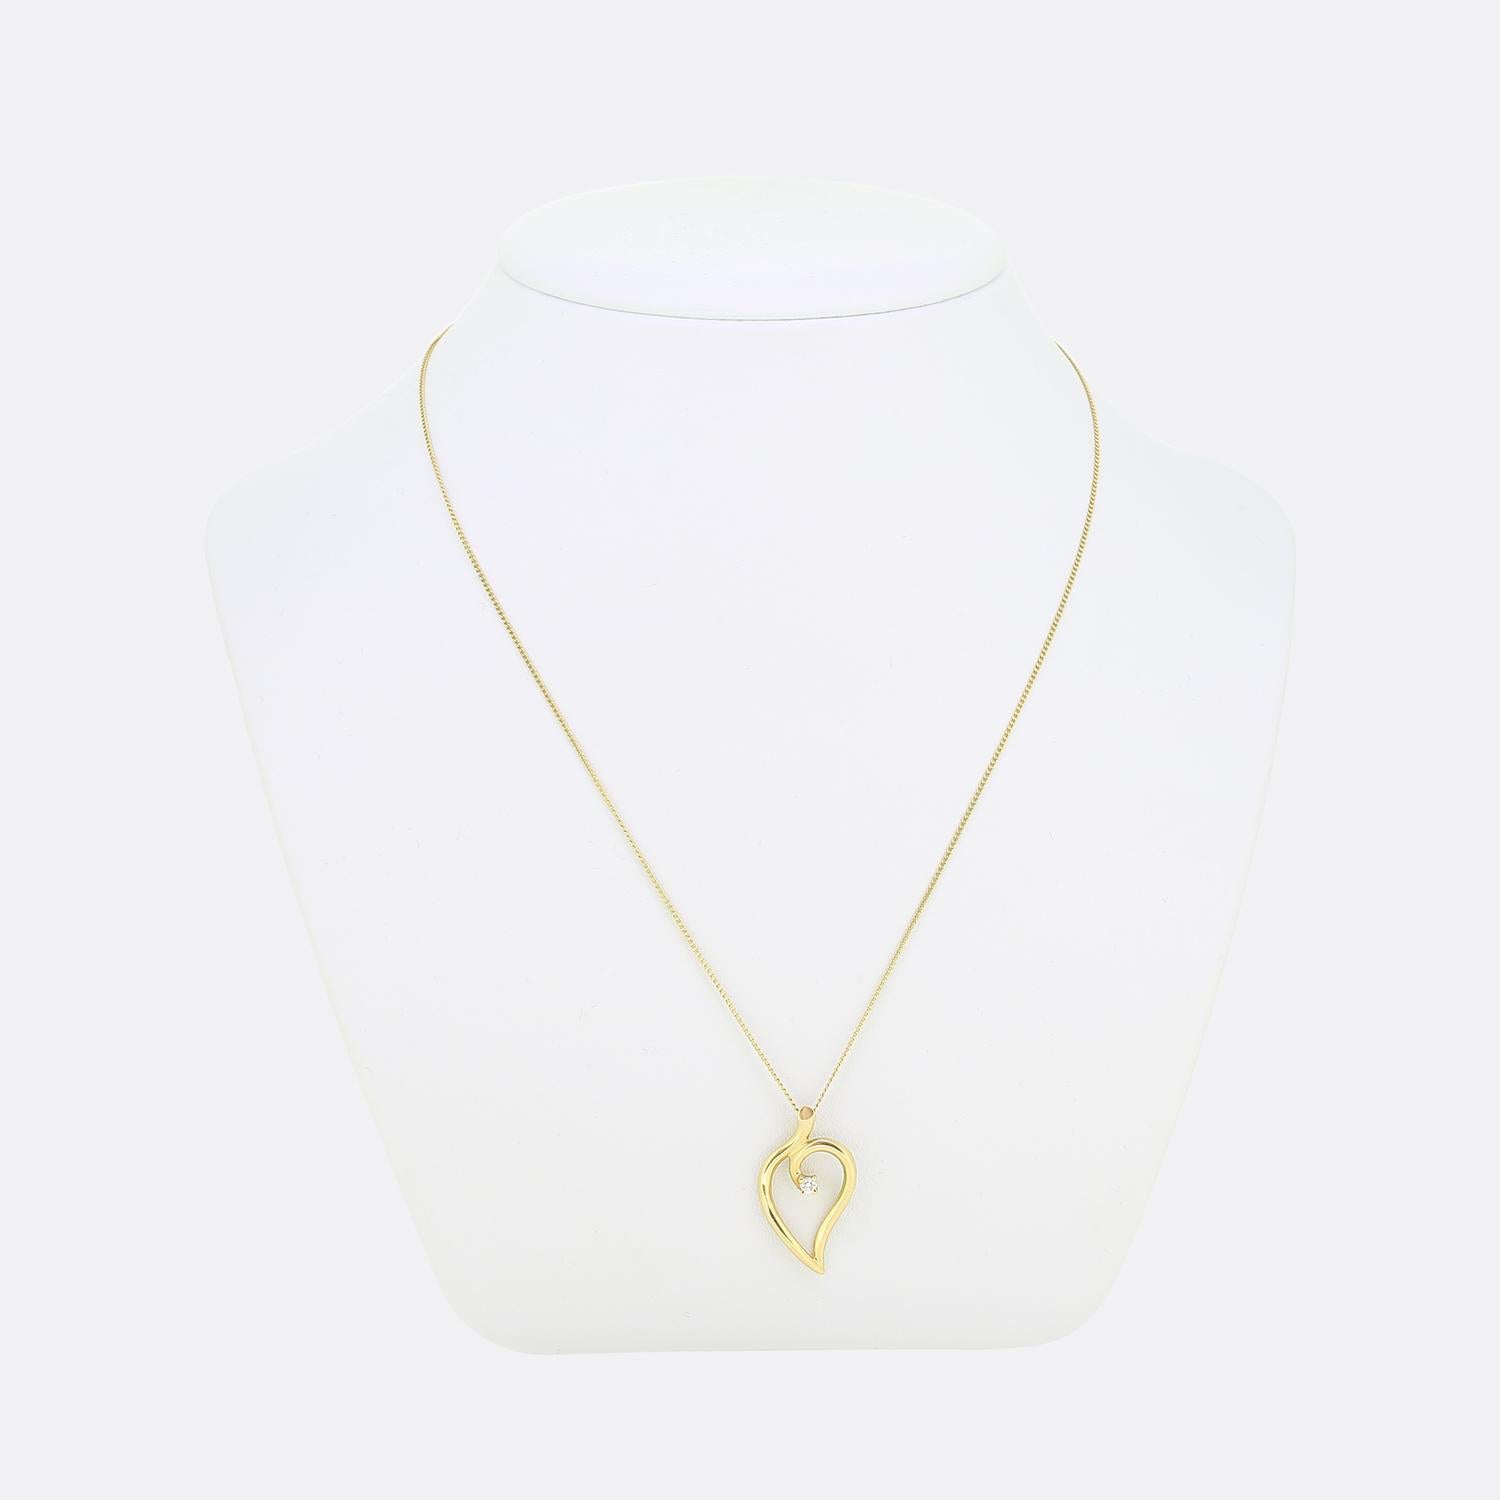 Here we have a wonderful necklace from the world renowned luxury jewellery designer Tiffany & Co. The pendant on show here has been crafted from 18ct yellow gold into the shape of an open leaf and set with a single round brilliant cut diamond whilst